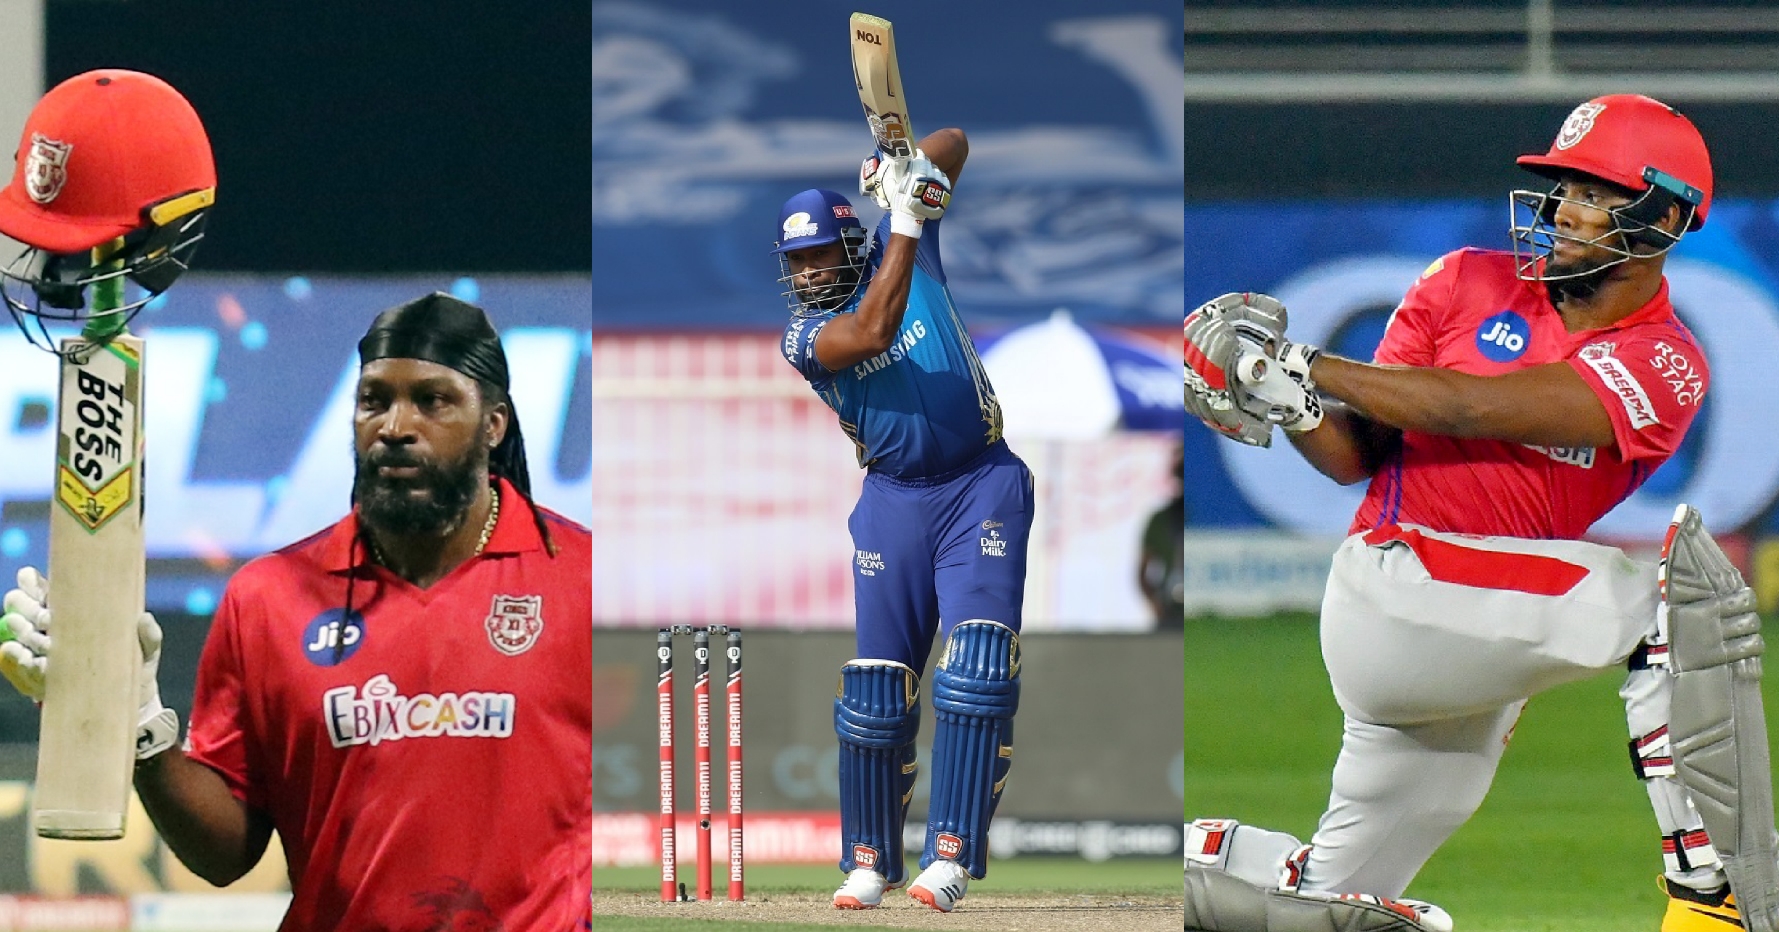 Pooran, Pollard Gayle ignite IPL league stages with Caribbean flavour